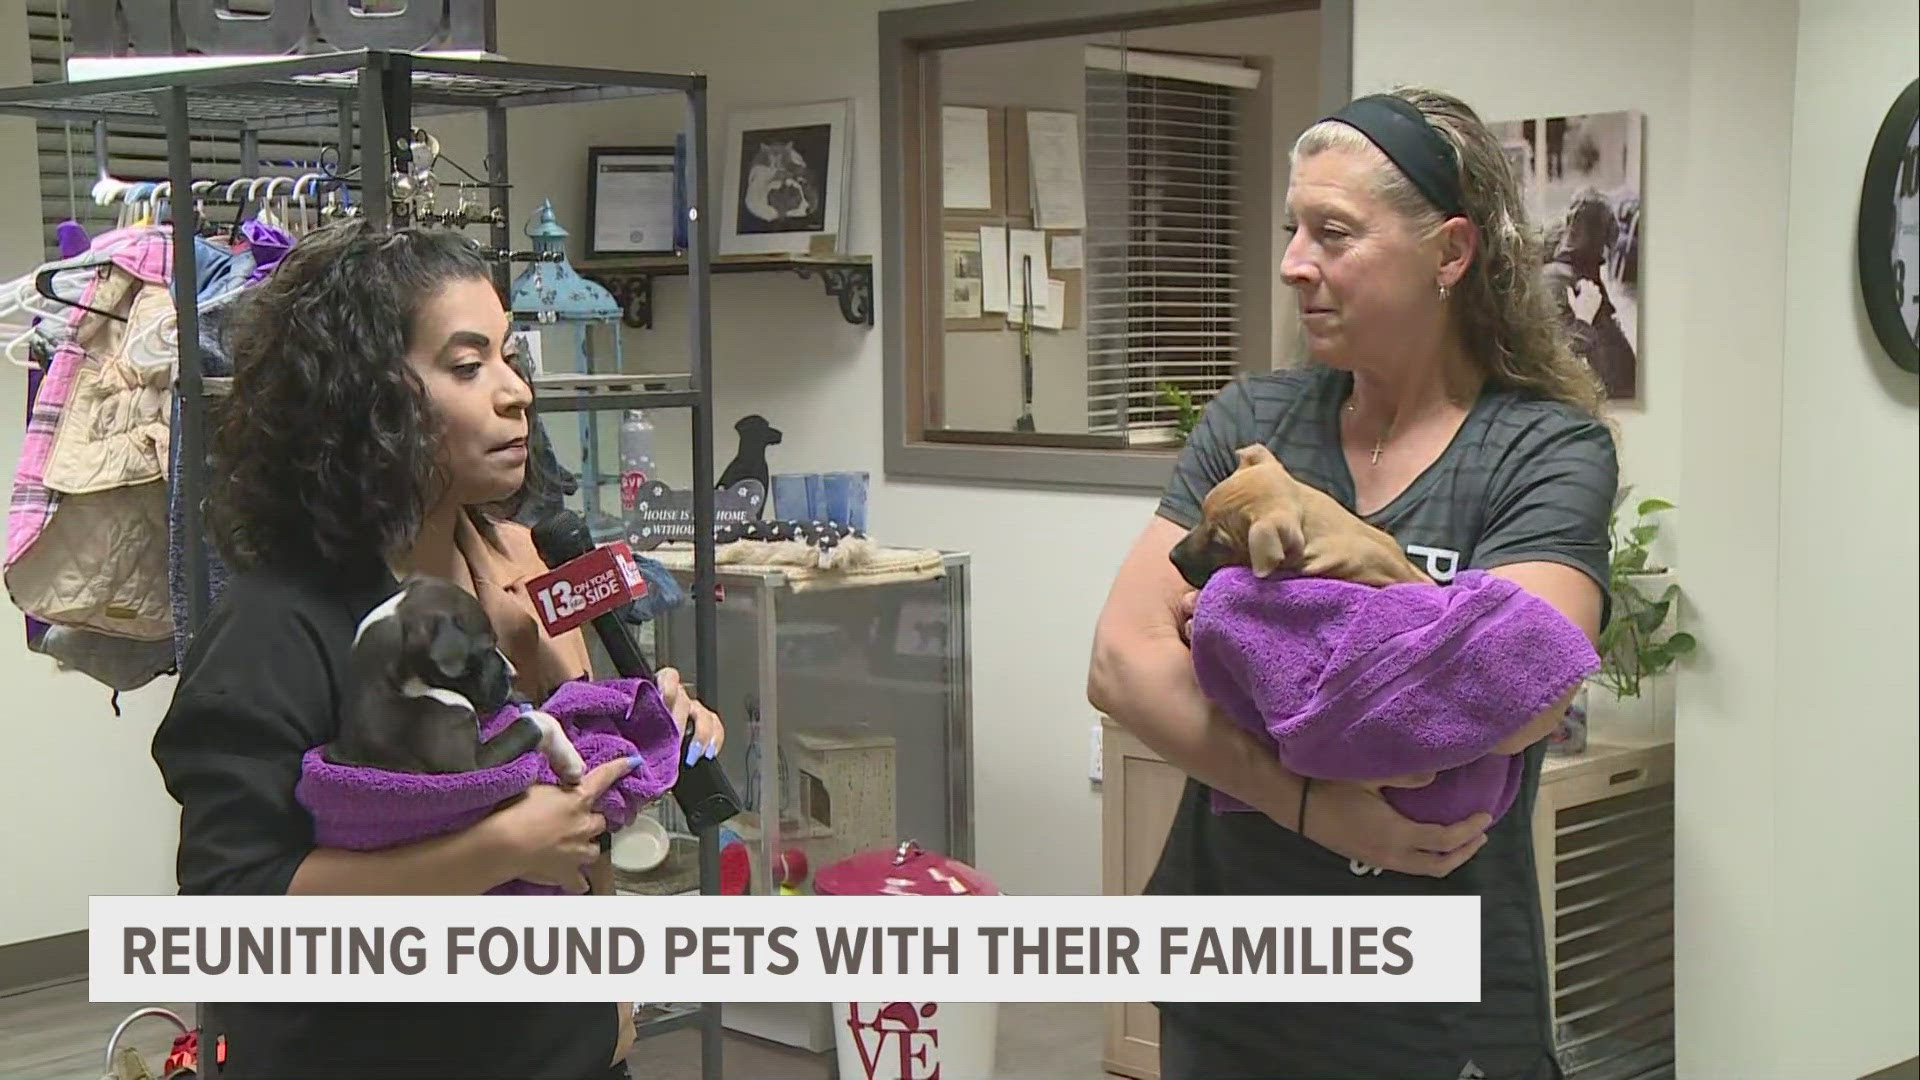 The days after the Fourth of July are usually busy for animal shelters as stray intake spikes. Here's how you can help reunite lost pets with their families.